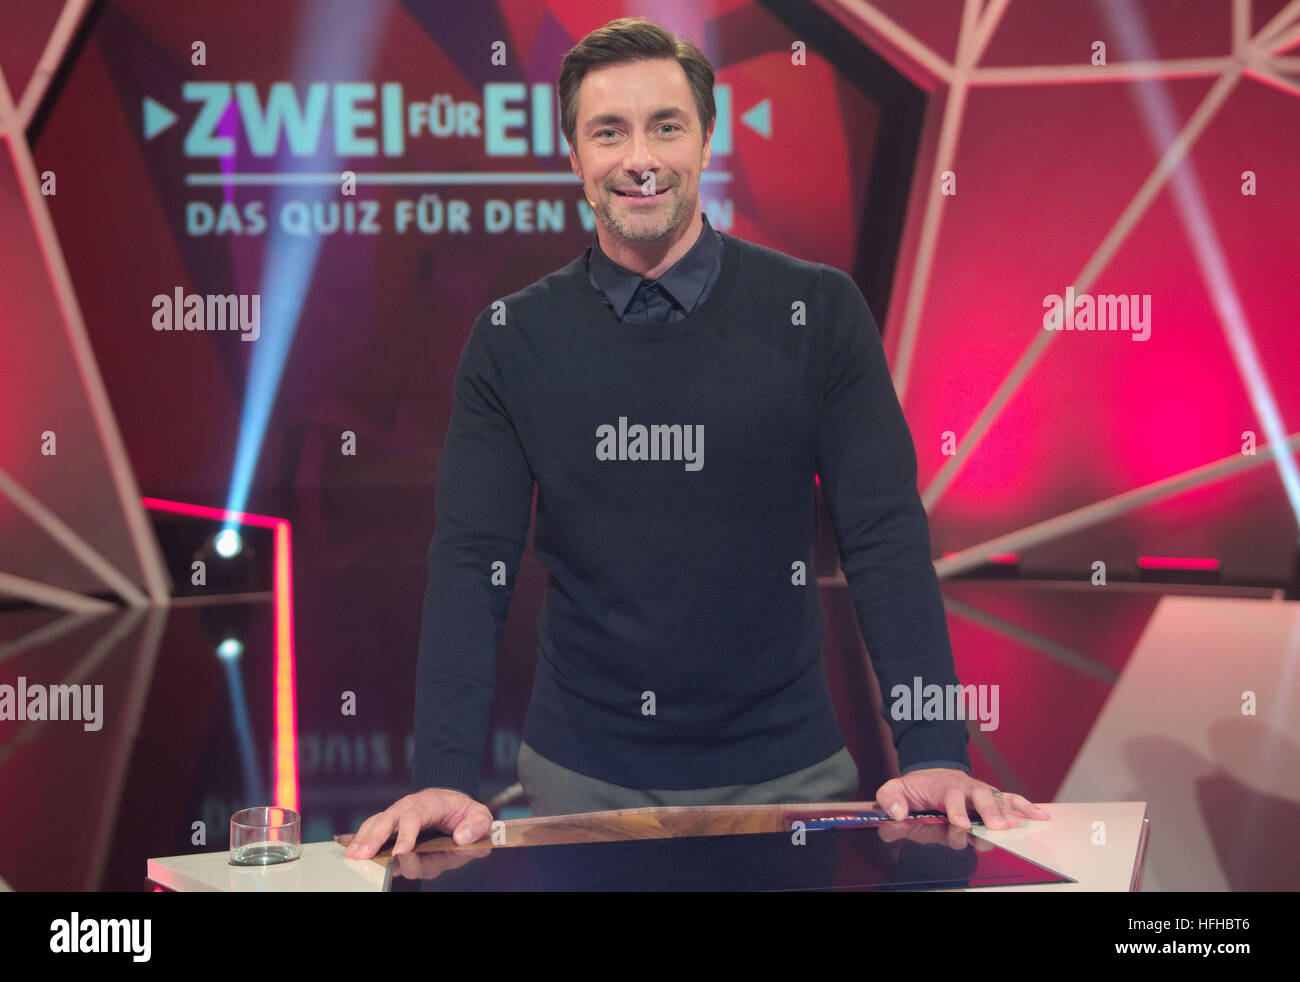 Cologne, Germany. 12th Dec, 2016. German TV presenter Marco Schreyl during filming in a studio in Cologne, Germany, 12 December 2016. The first episode of the new TV show 'Zwei fuer Eins' ('Two for One') will be aired on the 04.01.17. Photo: Henning Kaiser/dpa/Alamy Live News Stock Photo